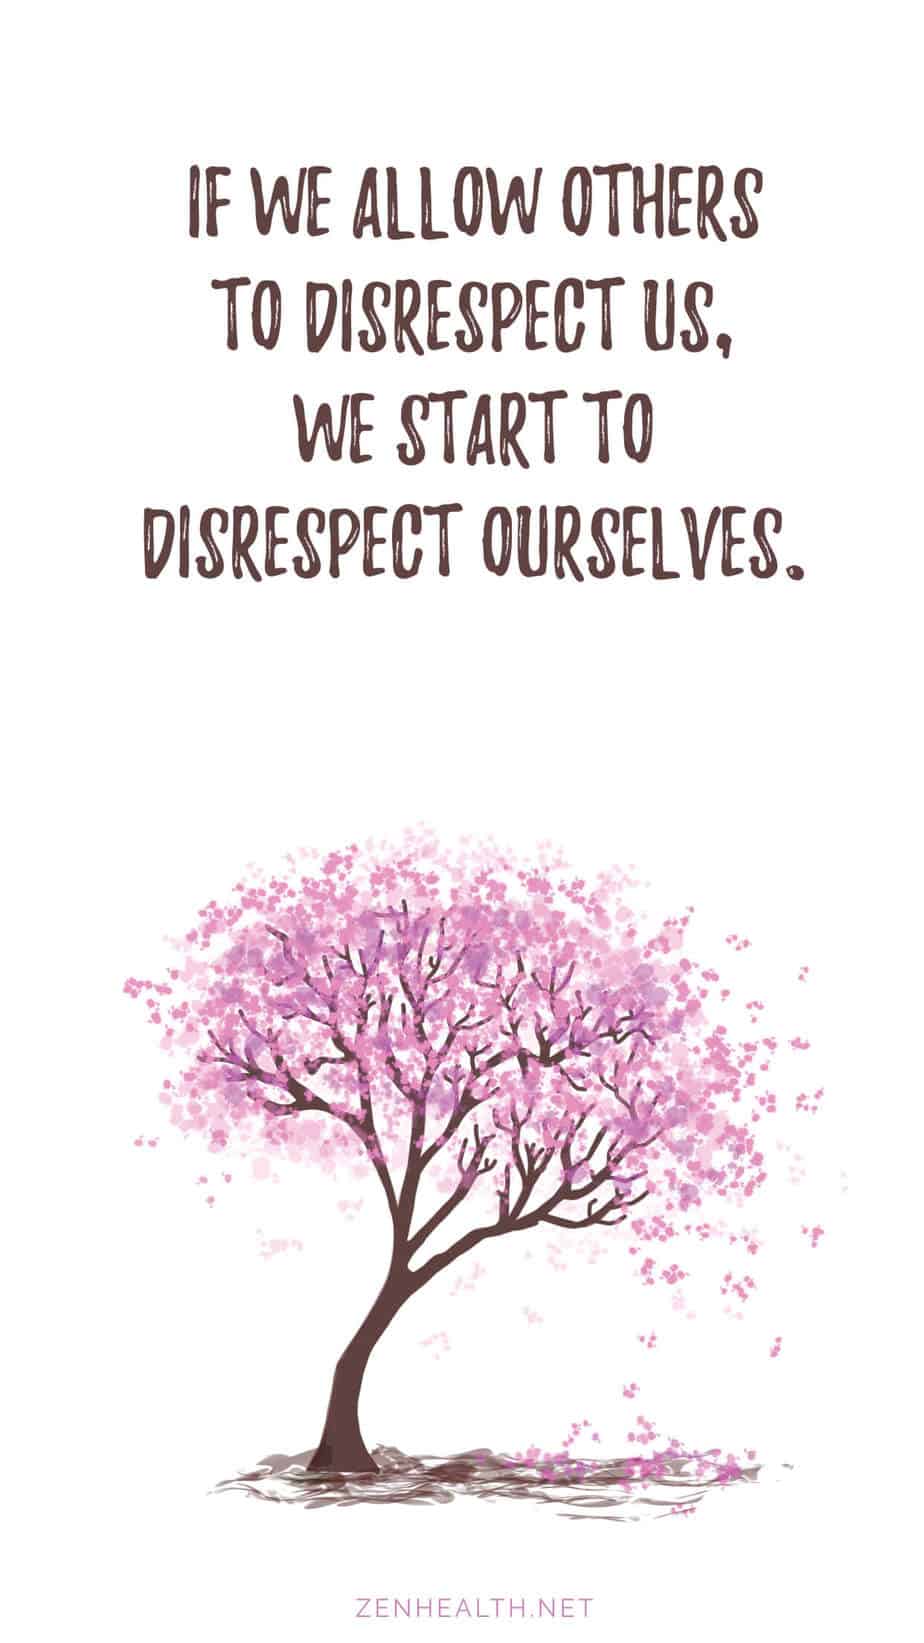 If we allow others to disrespect us, we start to disrespect ourselves.